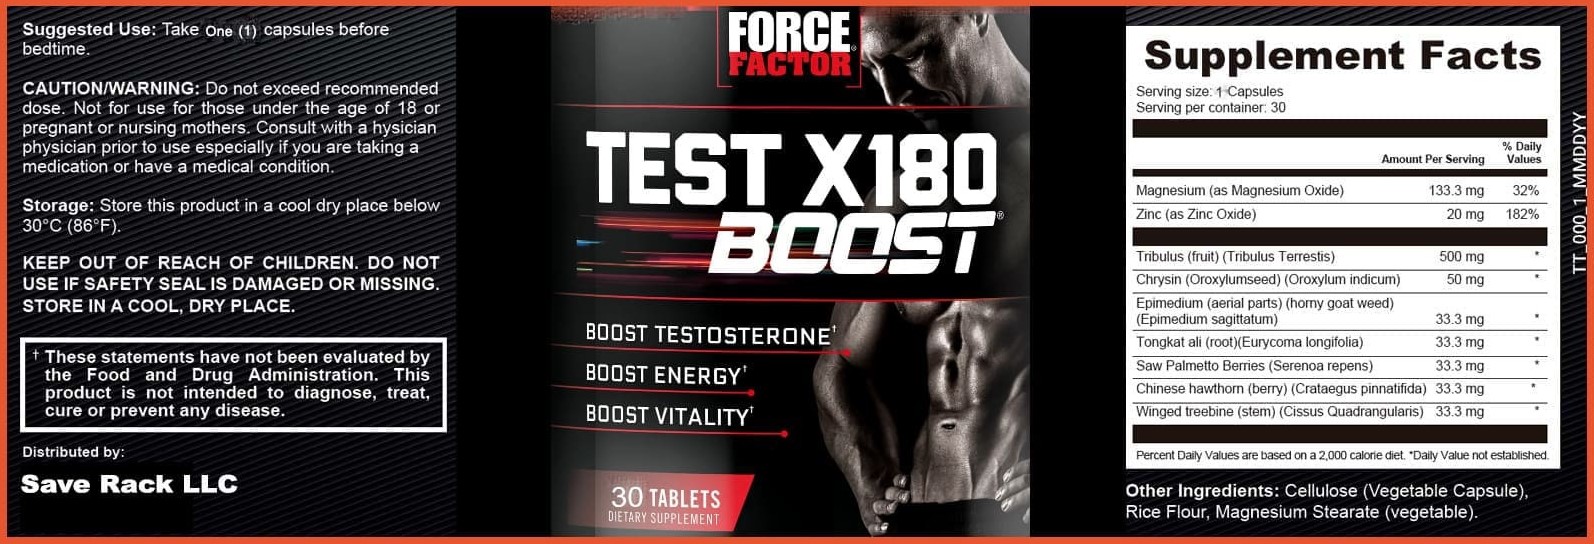 force factor test x 180 boost supplement facts